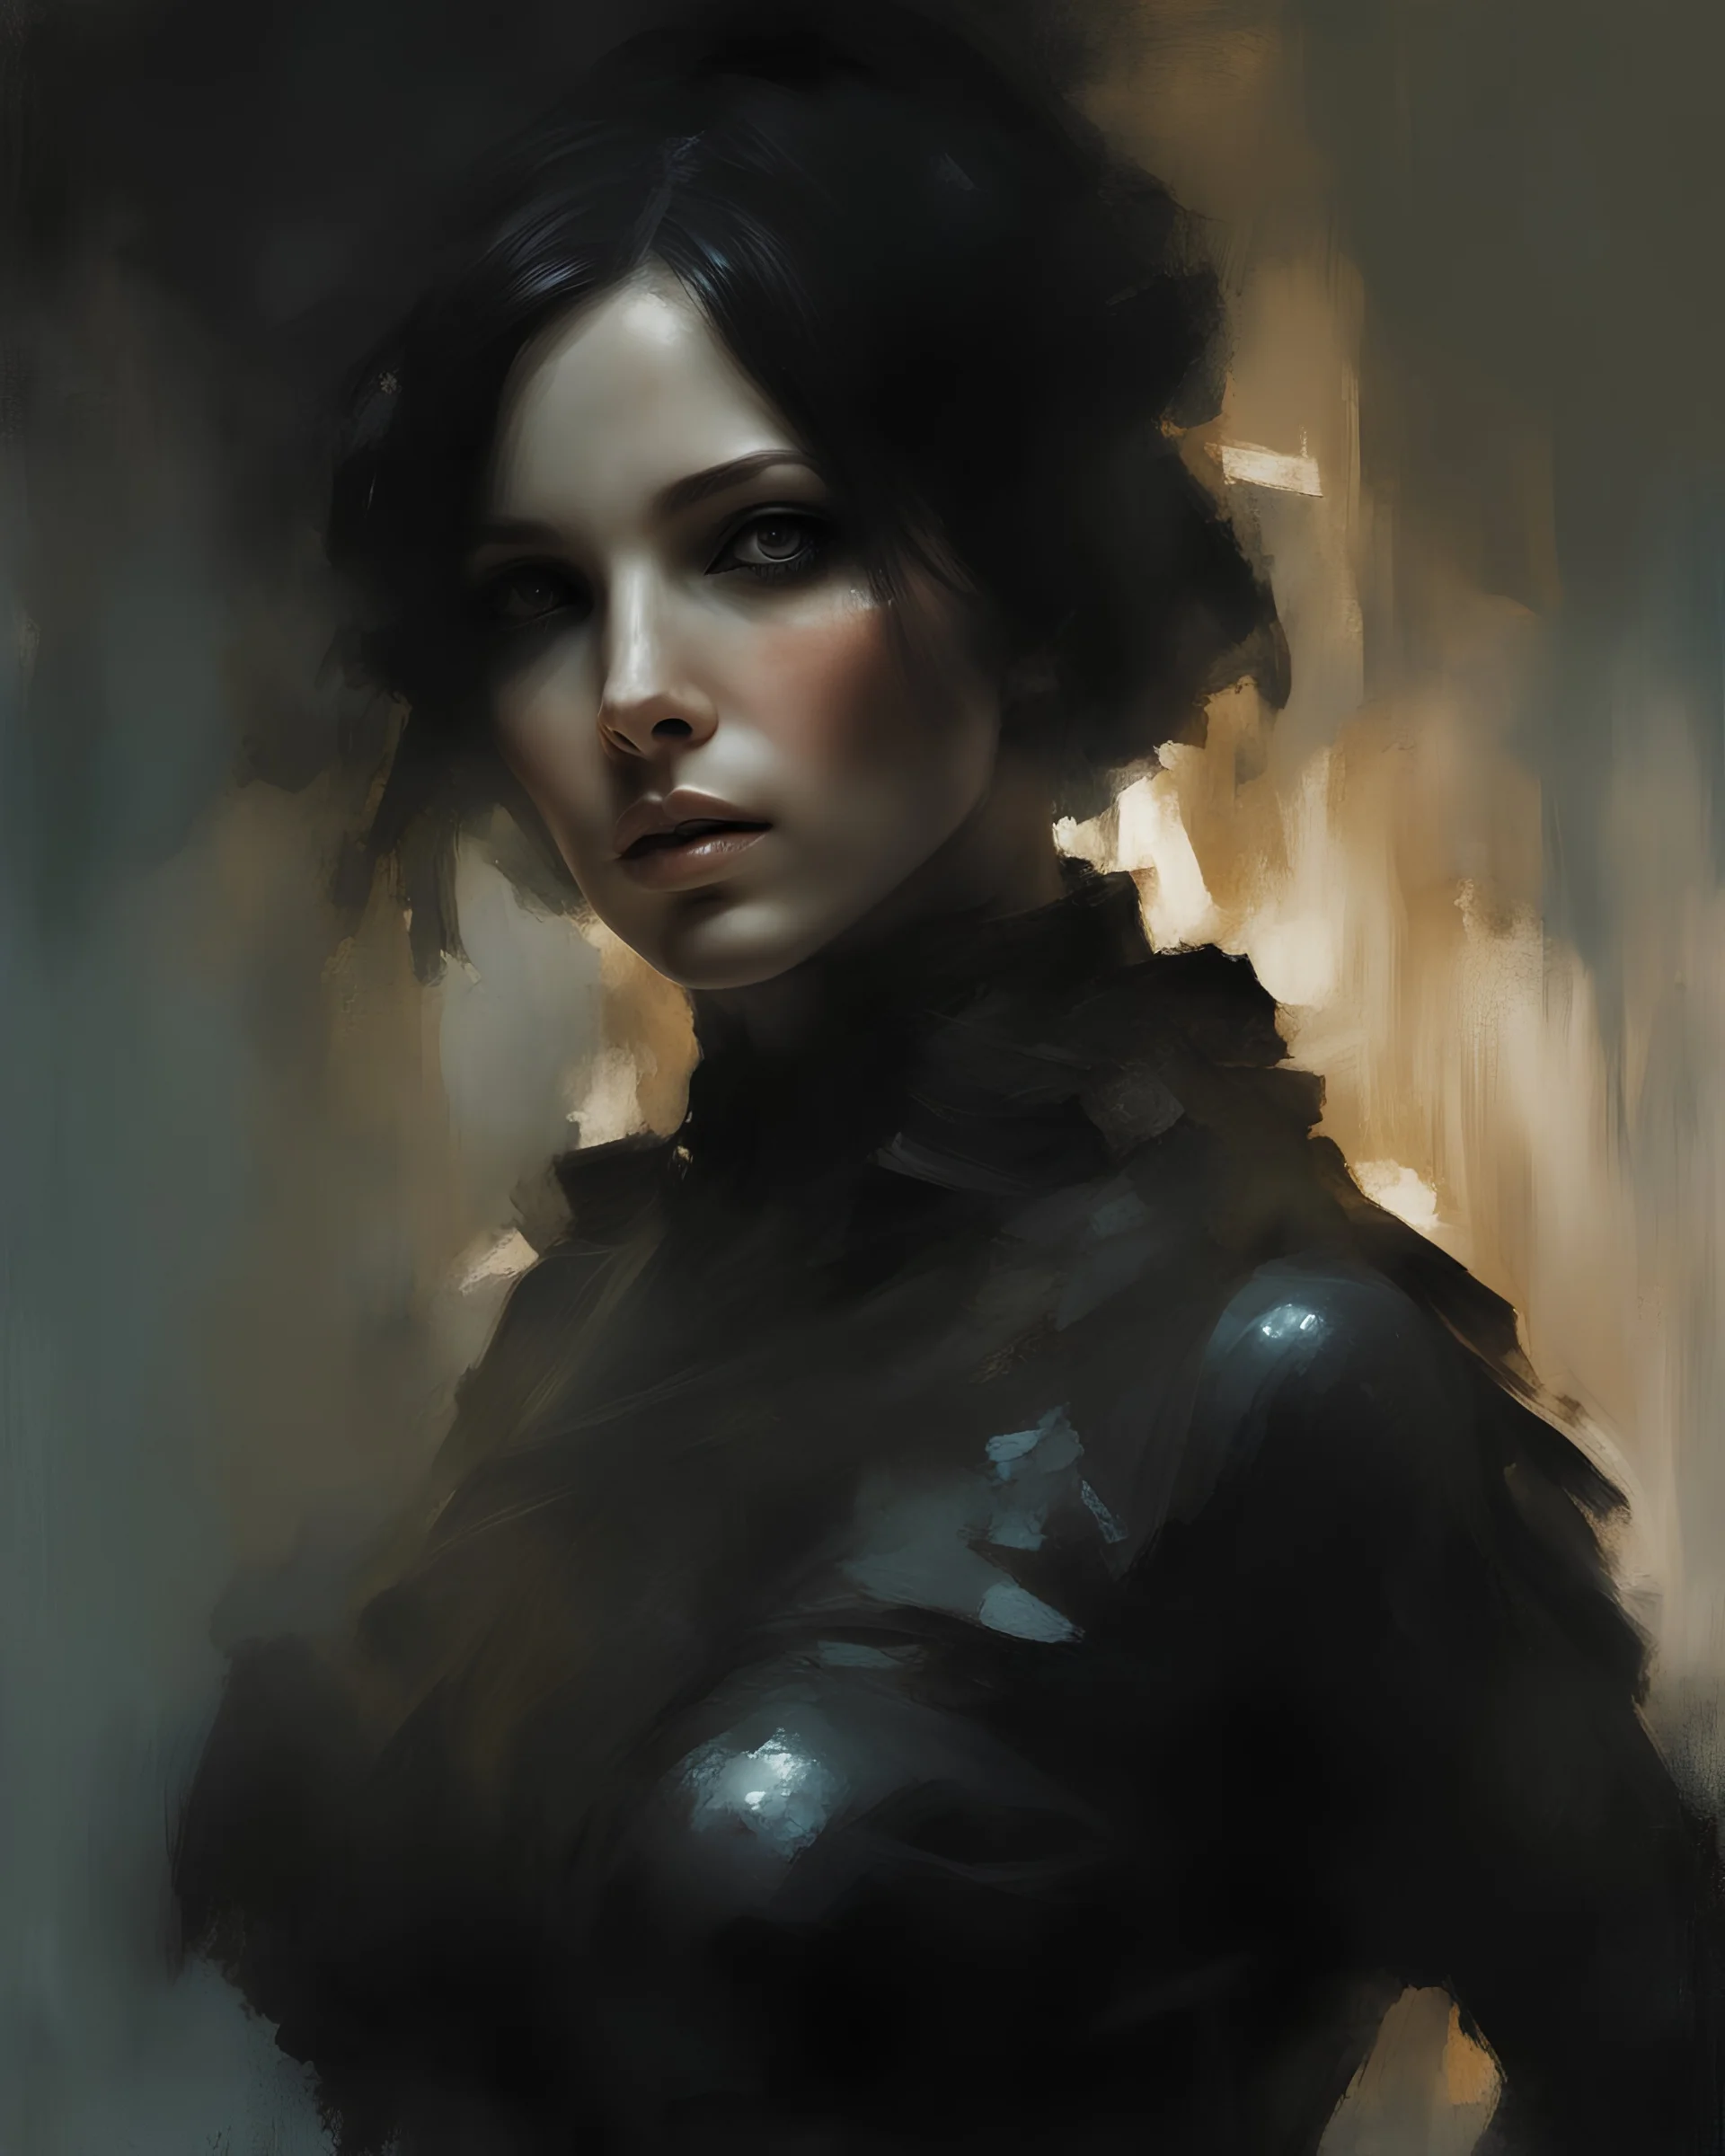 Toy doll,doll close-up face, woman portrait , 40 years old, woman,toy doll portrait with black soot on her face, dramatic lighting, skin pots dreamy girl ,dramatic lighting, sharp focus, contrast, art by and Jeremy Mann, digital painting, artstation, concept art